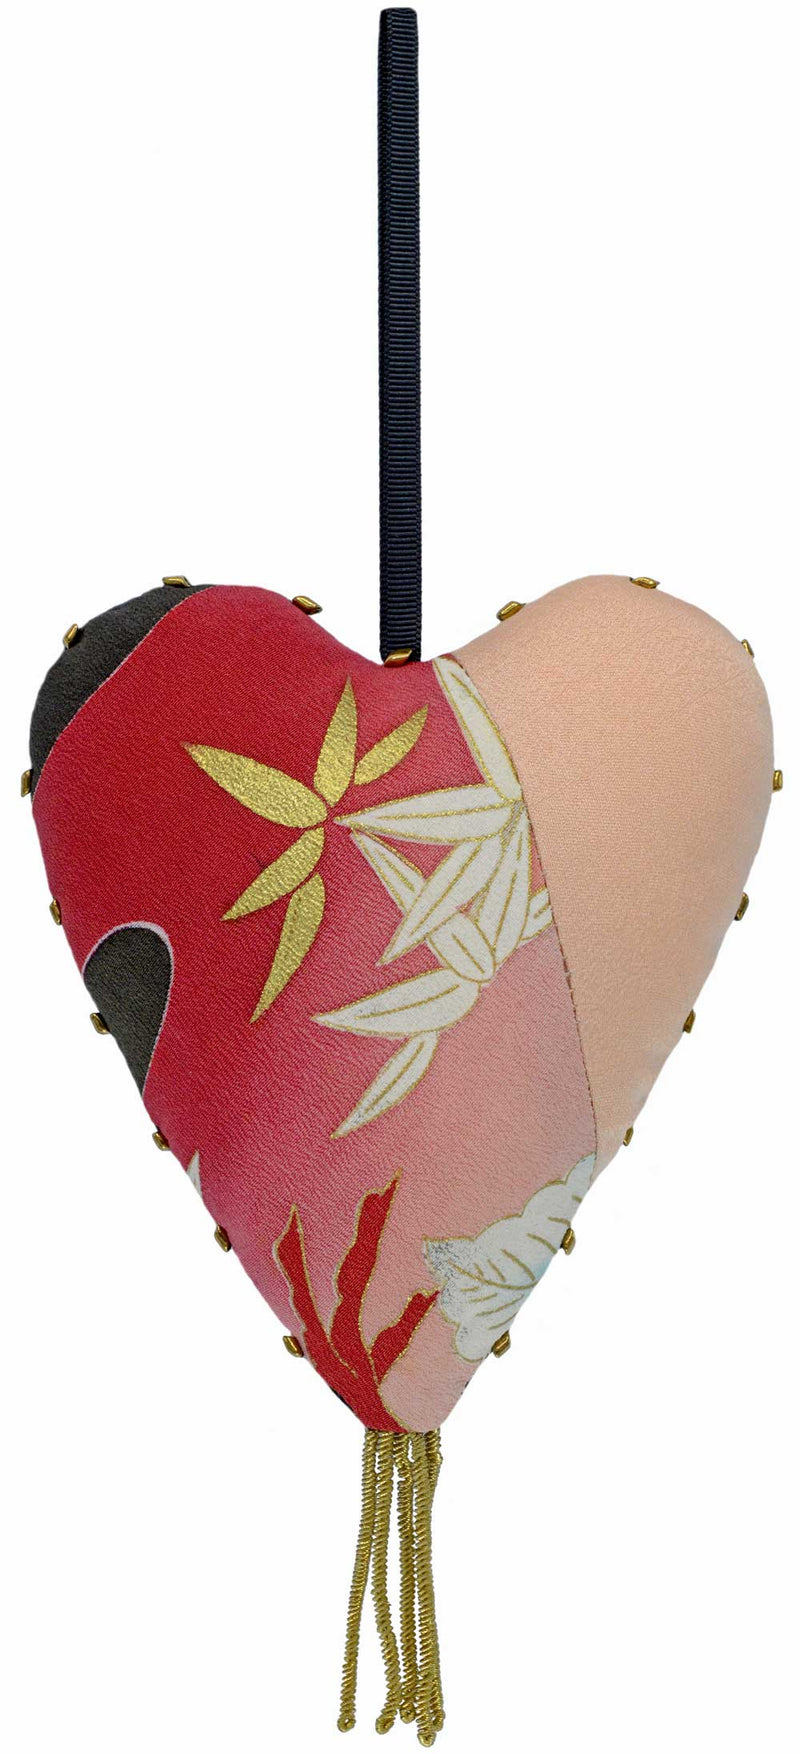 Hanging heart decoration, stuffed heart ornaments in antique silk.